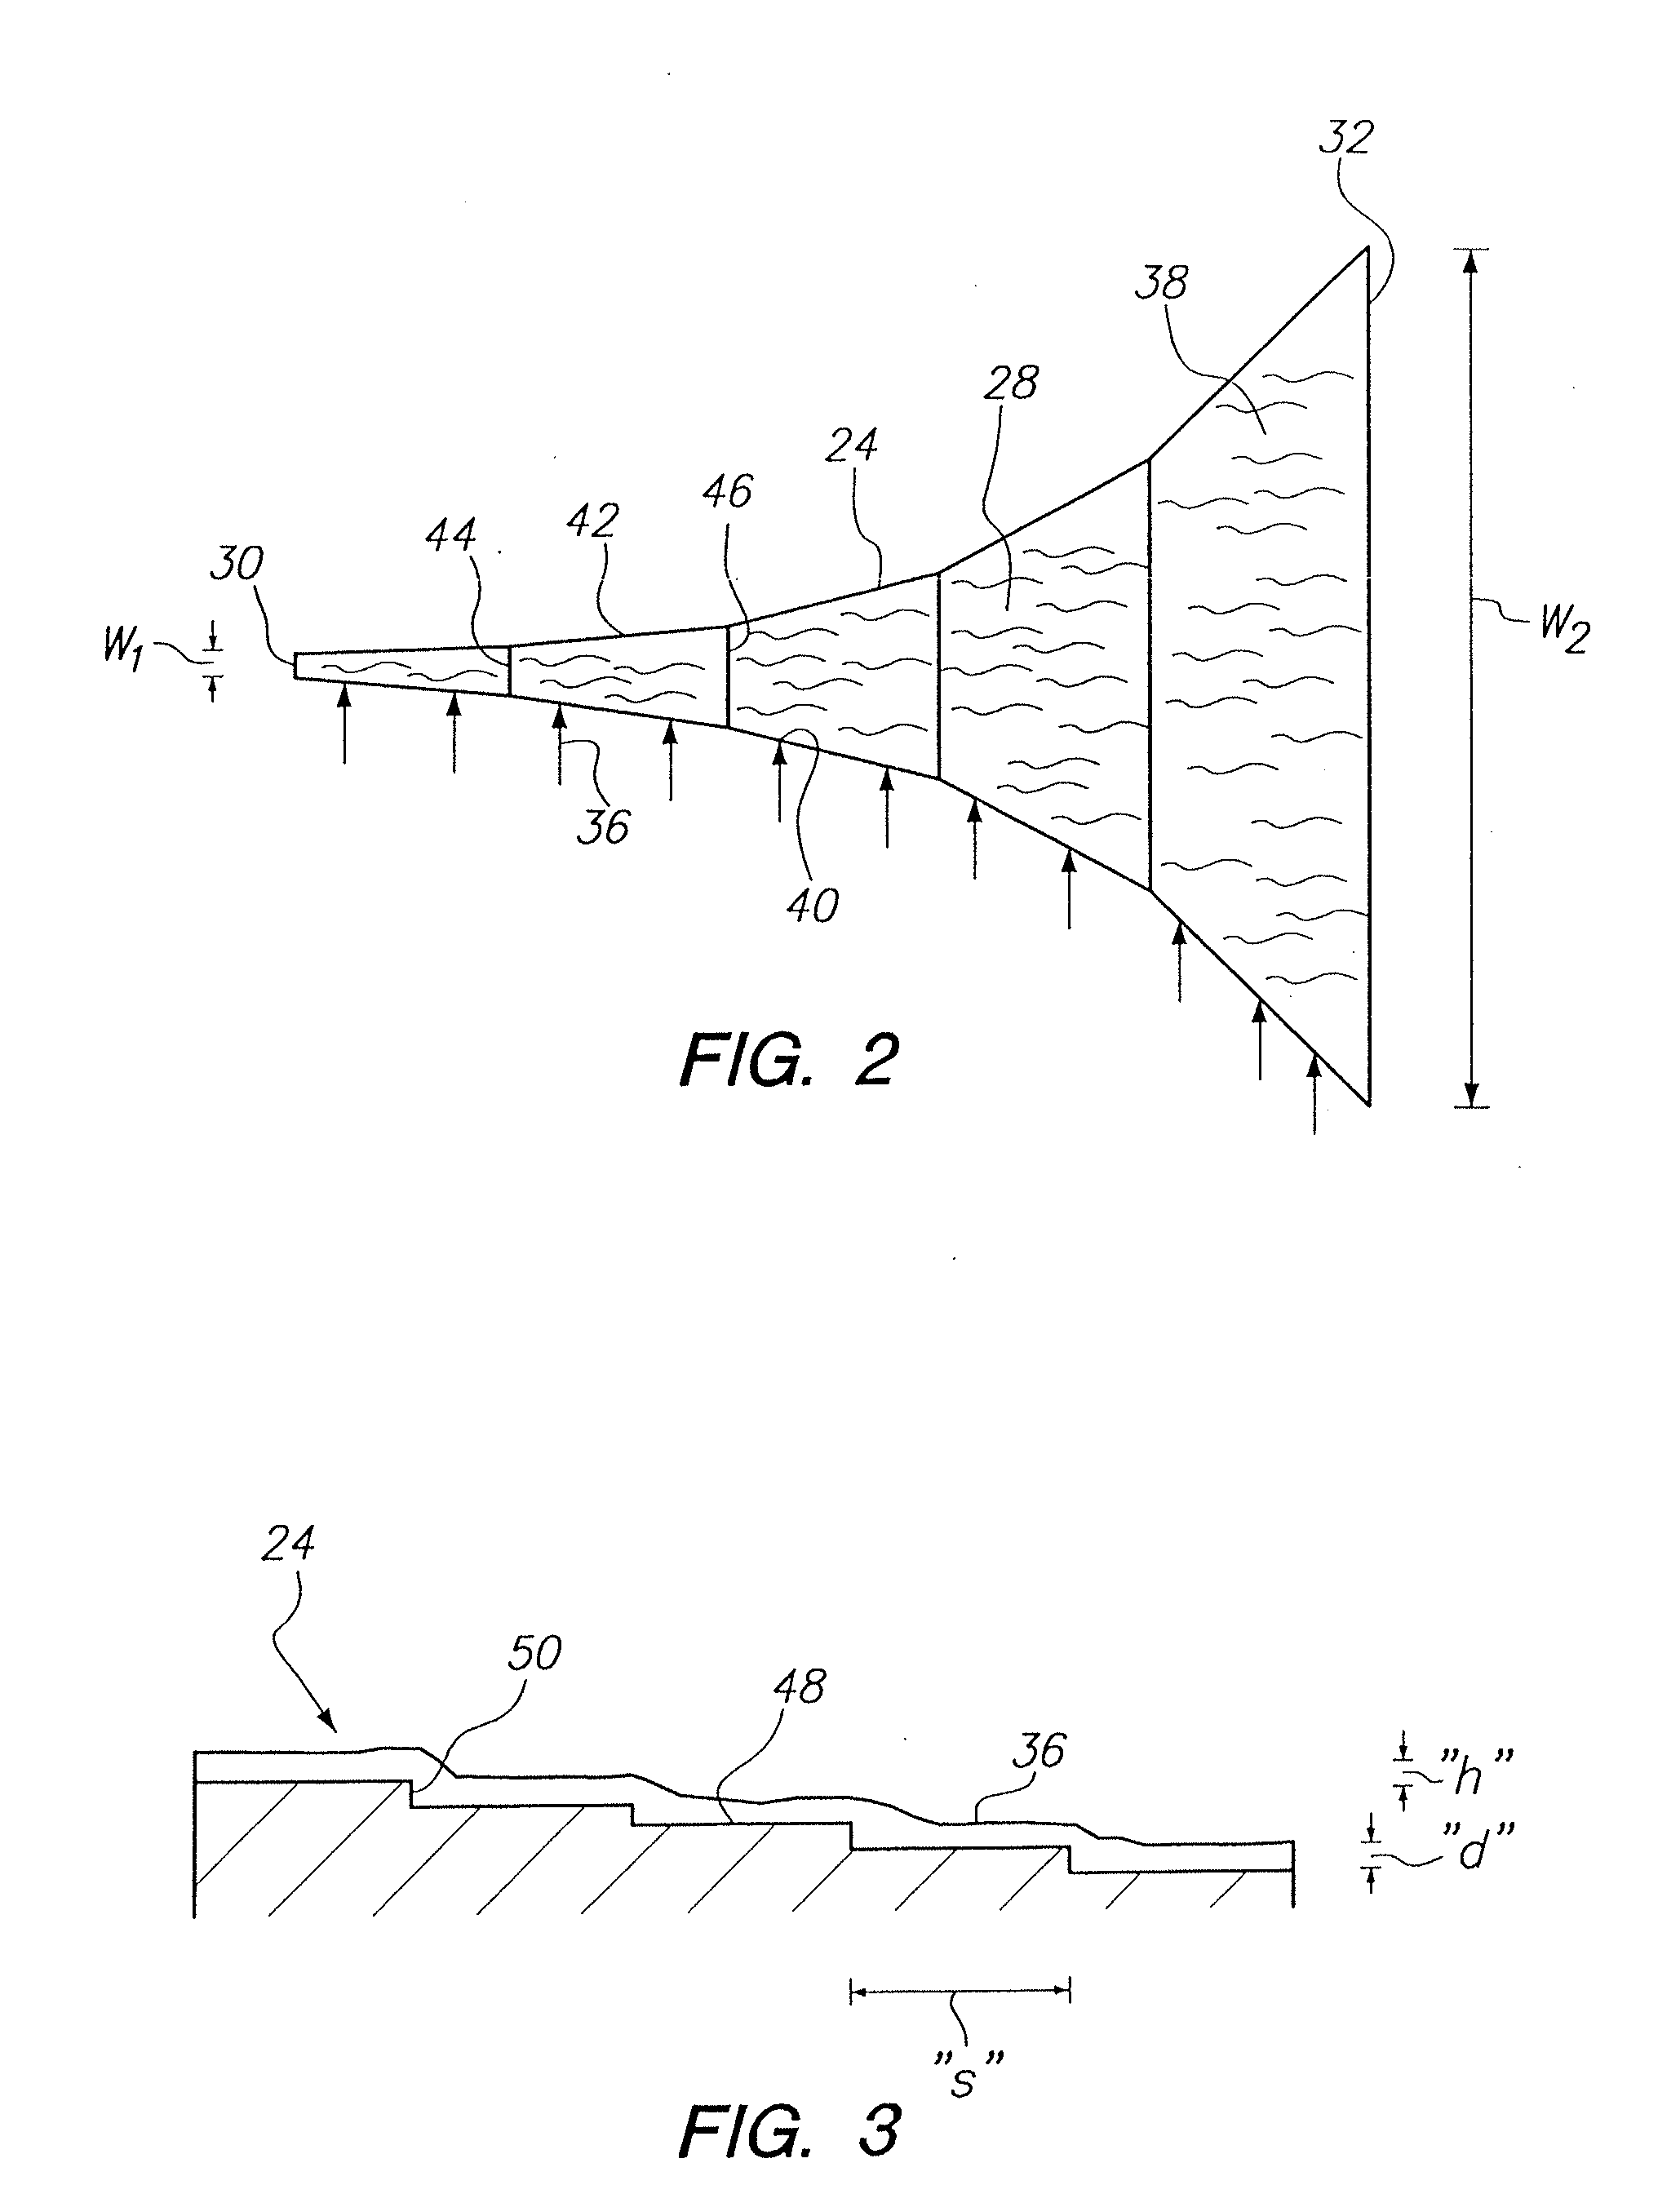 Method and System for Growing Microalgae in an Expanding Plug Flow Reactor